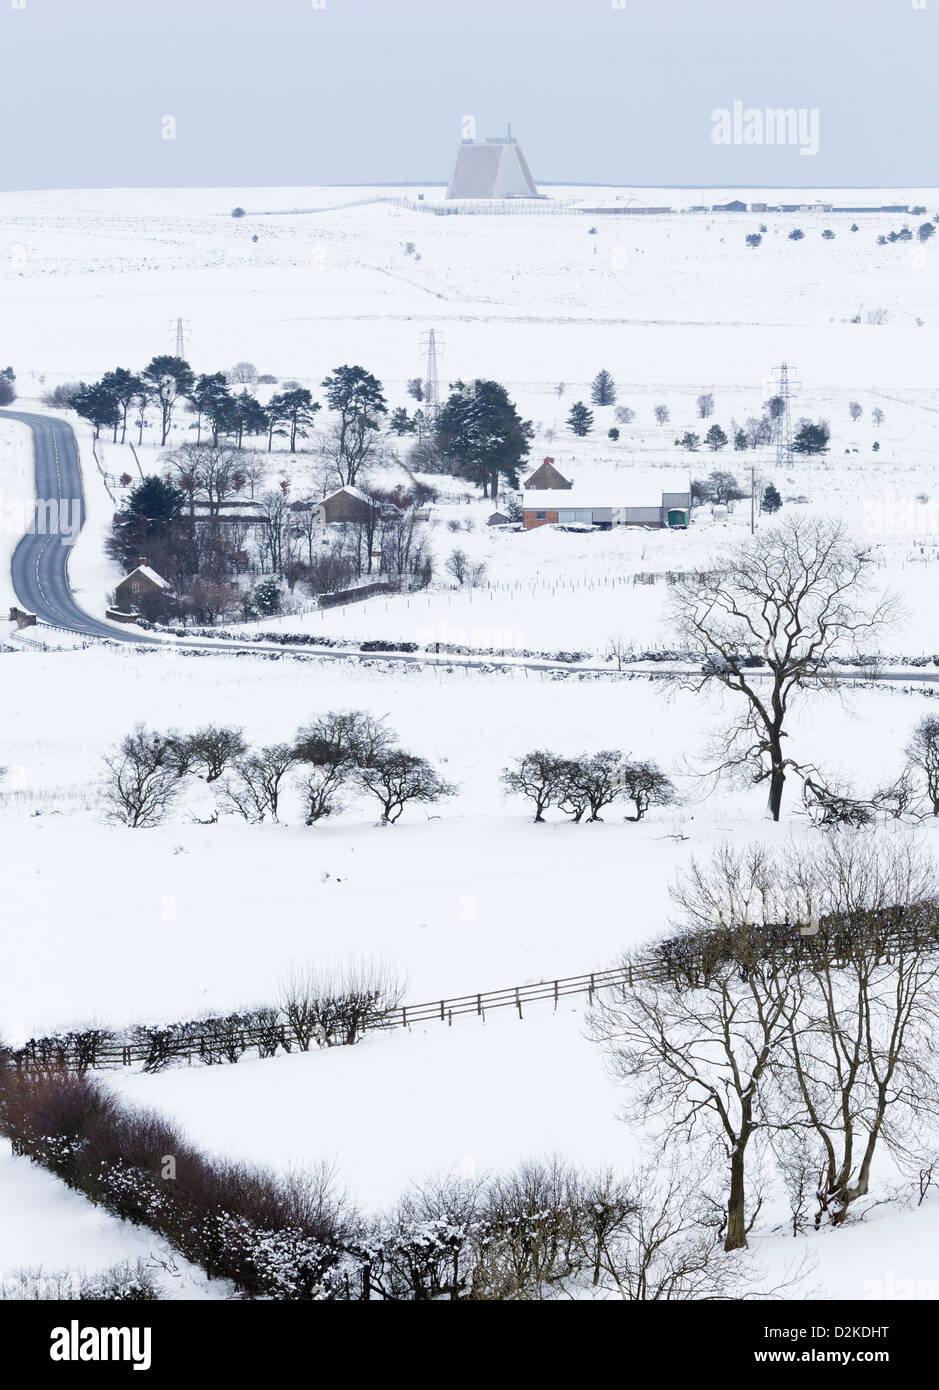 Royal Air Force Fylingdales, on the North York Moors, pictured in mid-winter. Stock Photo